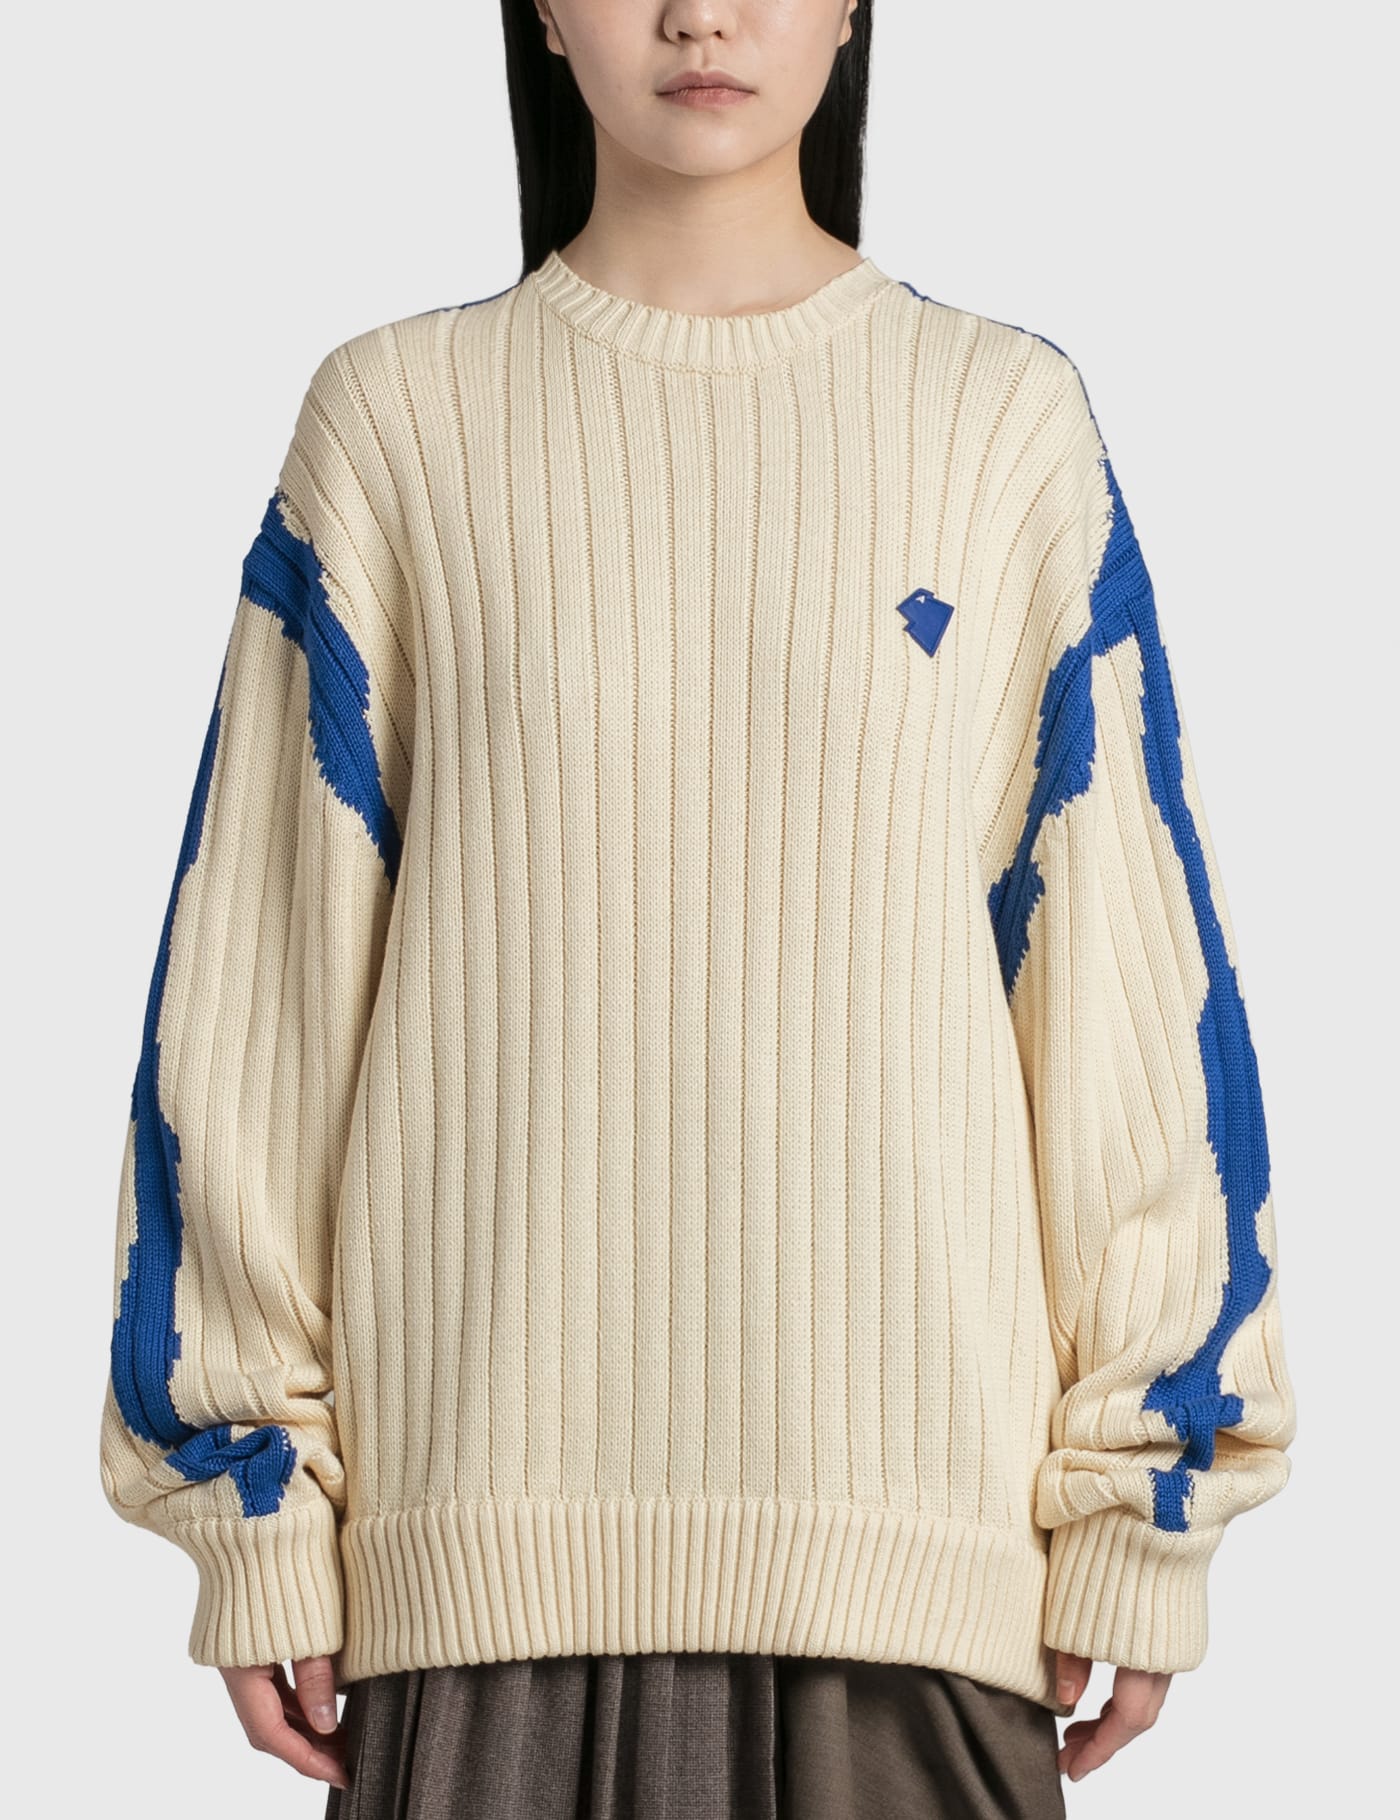 Ader Error - Benny Knit | HBX - Globally Curated Fashion and 